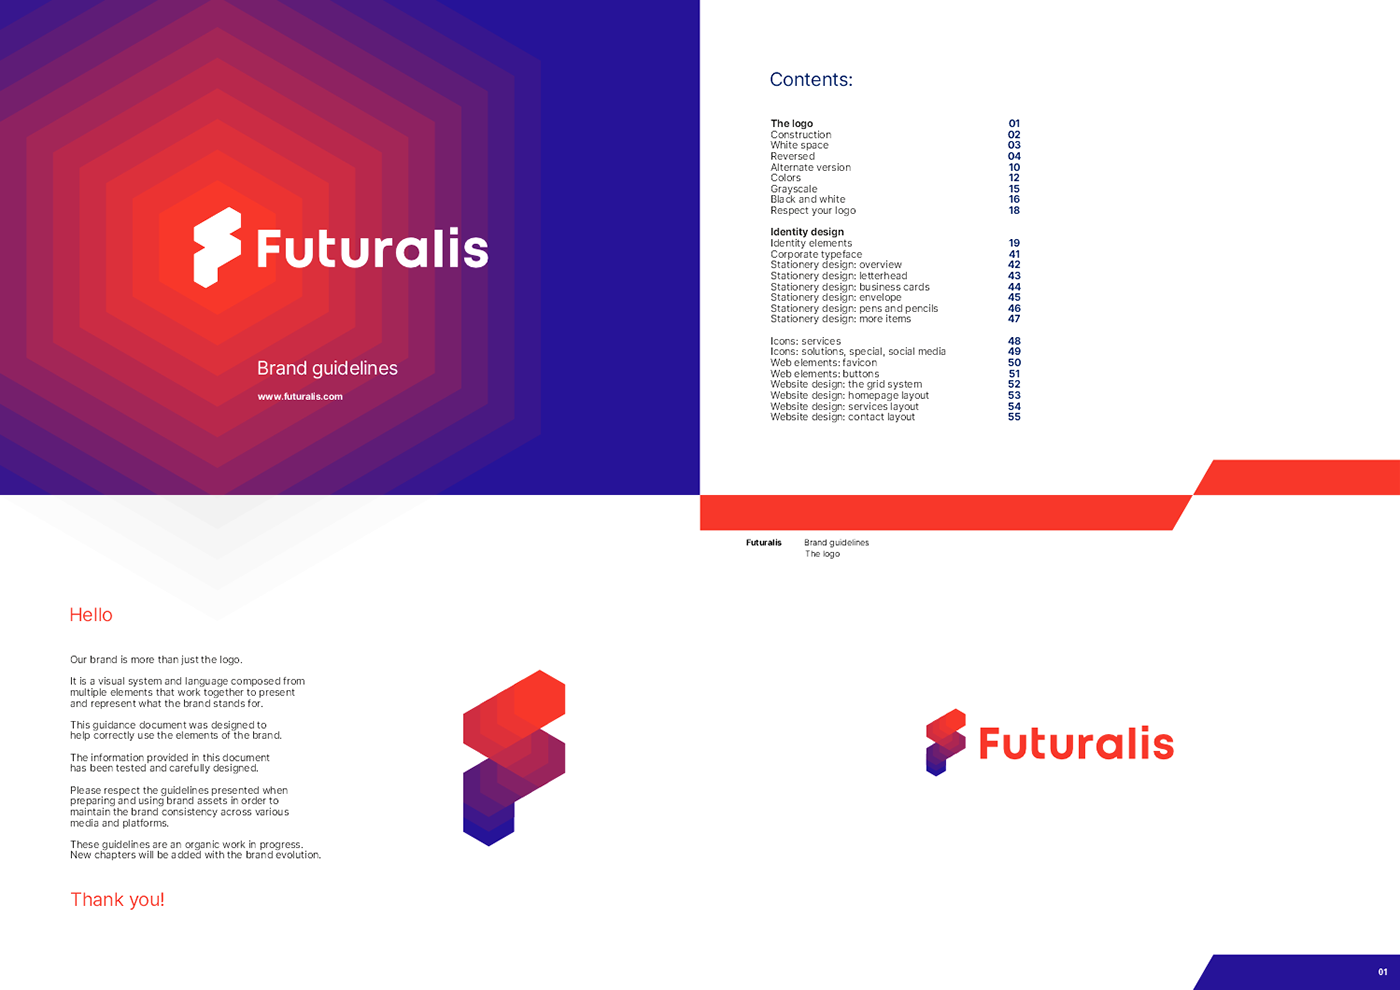 Brand manual with brand guidelines and logo guidelines developed for Futuralis, AWS cloud services